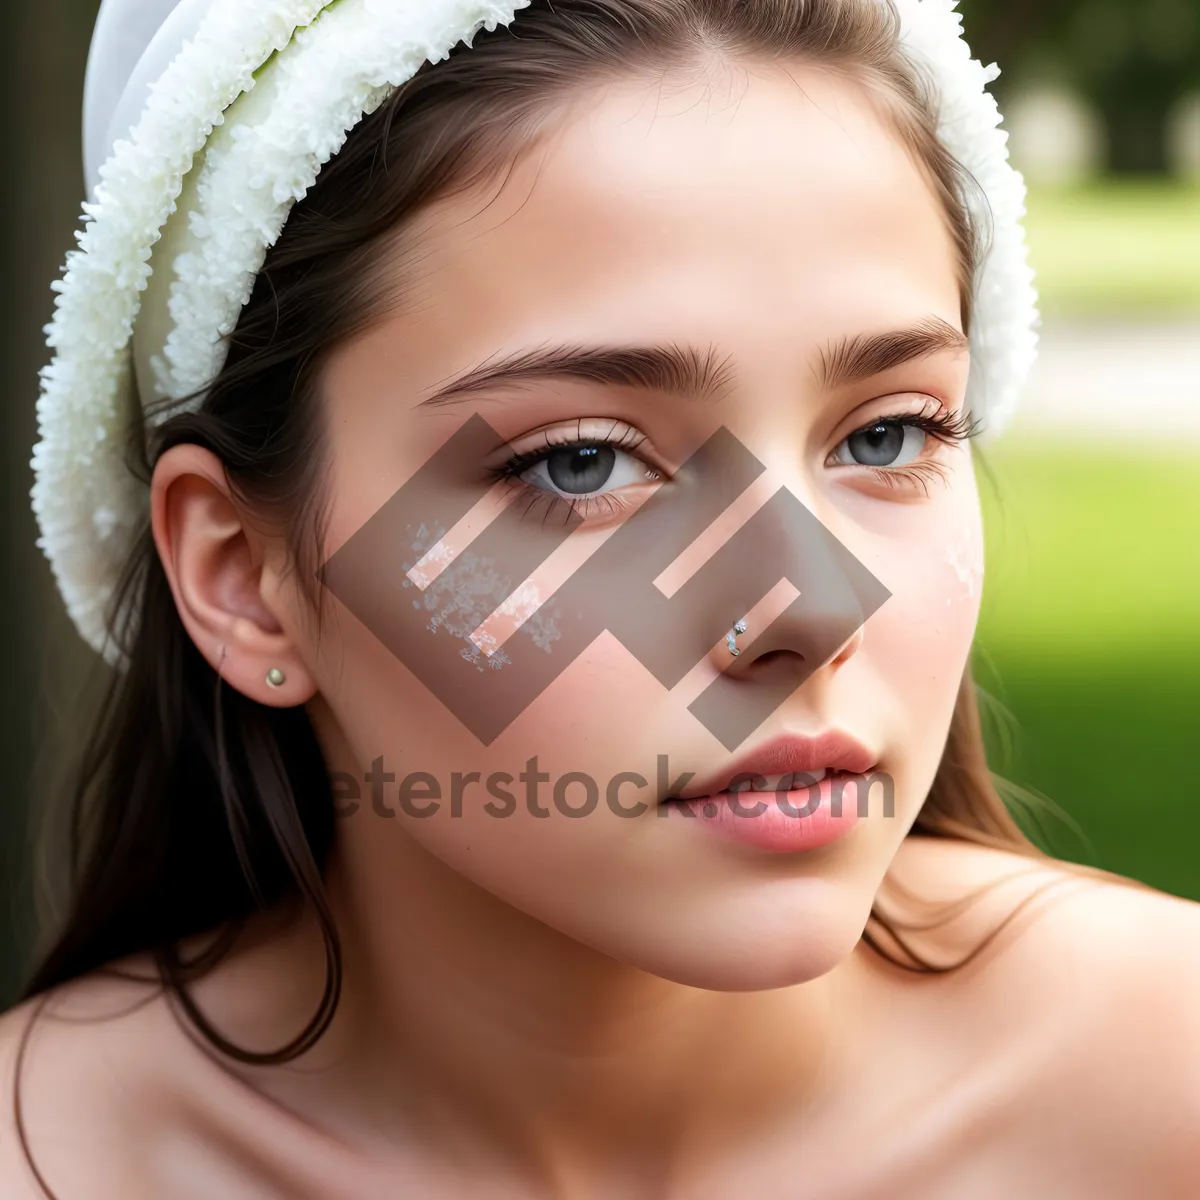 Picture of Natural Beauty: Lovely Lady with Gorgeous Makeup